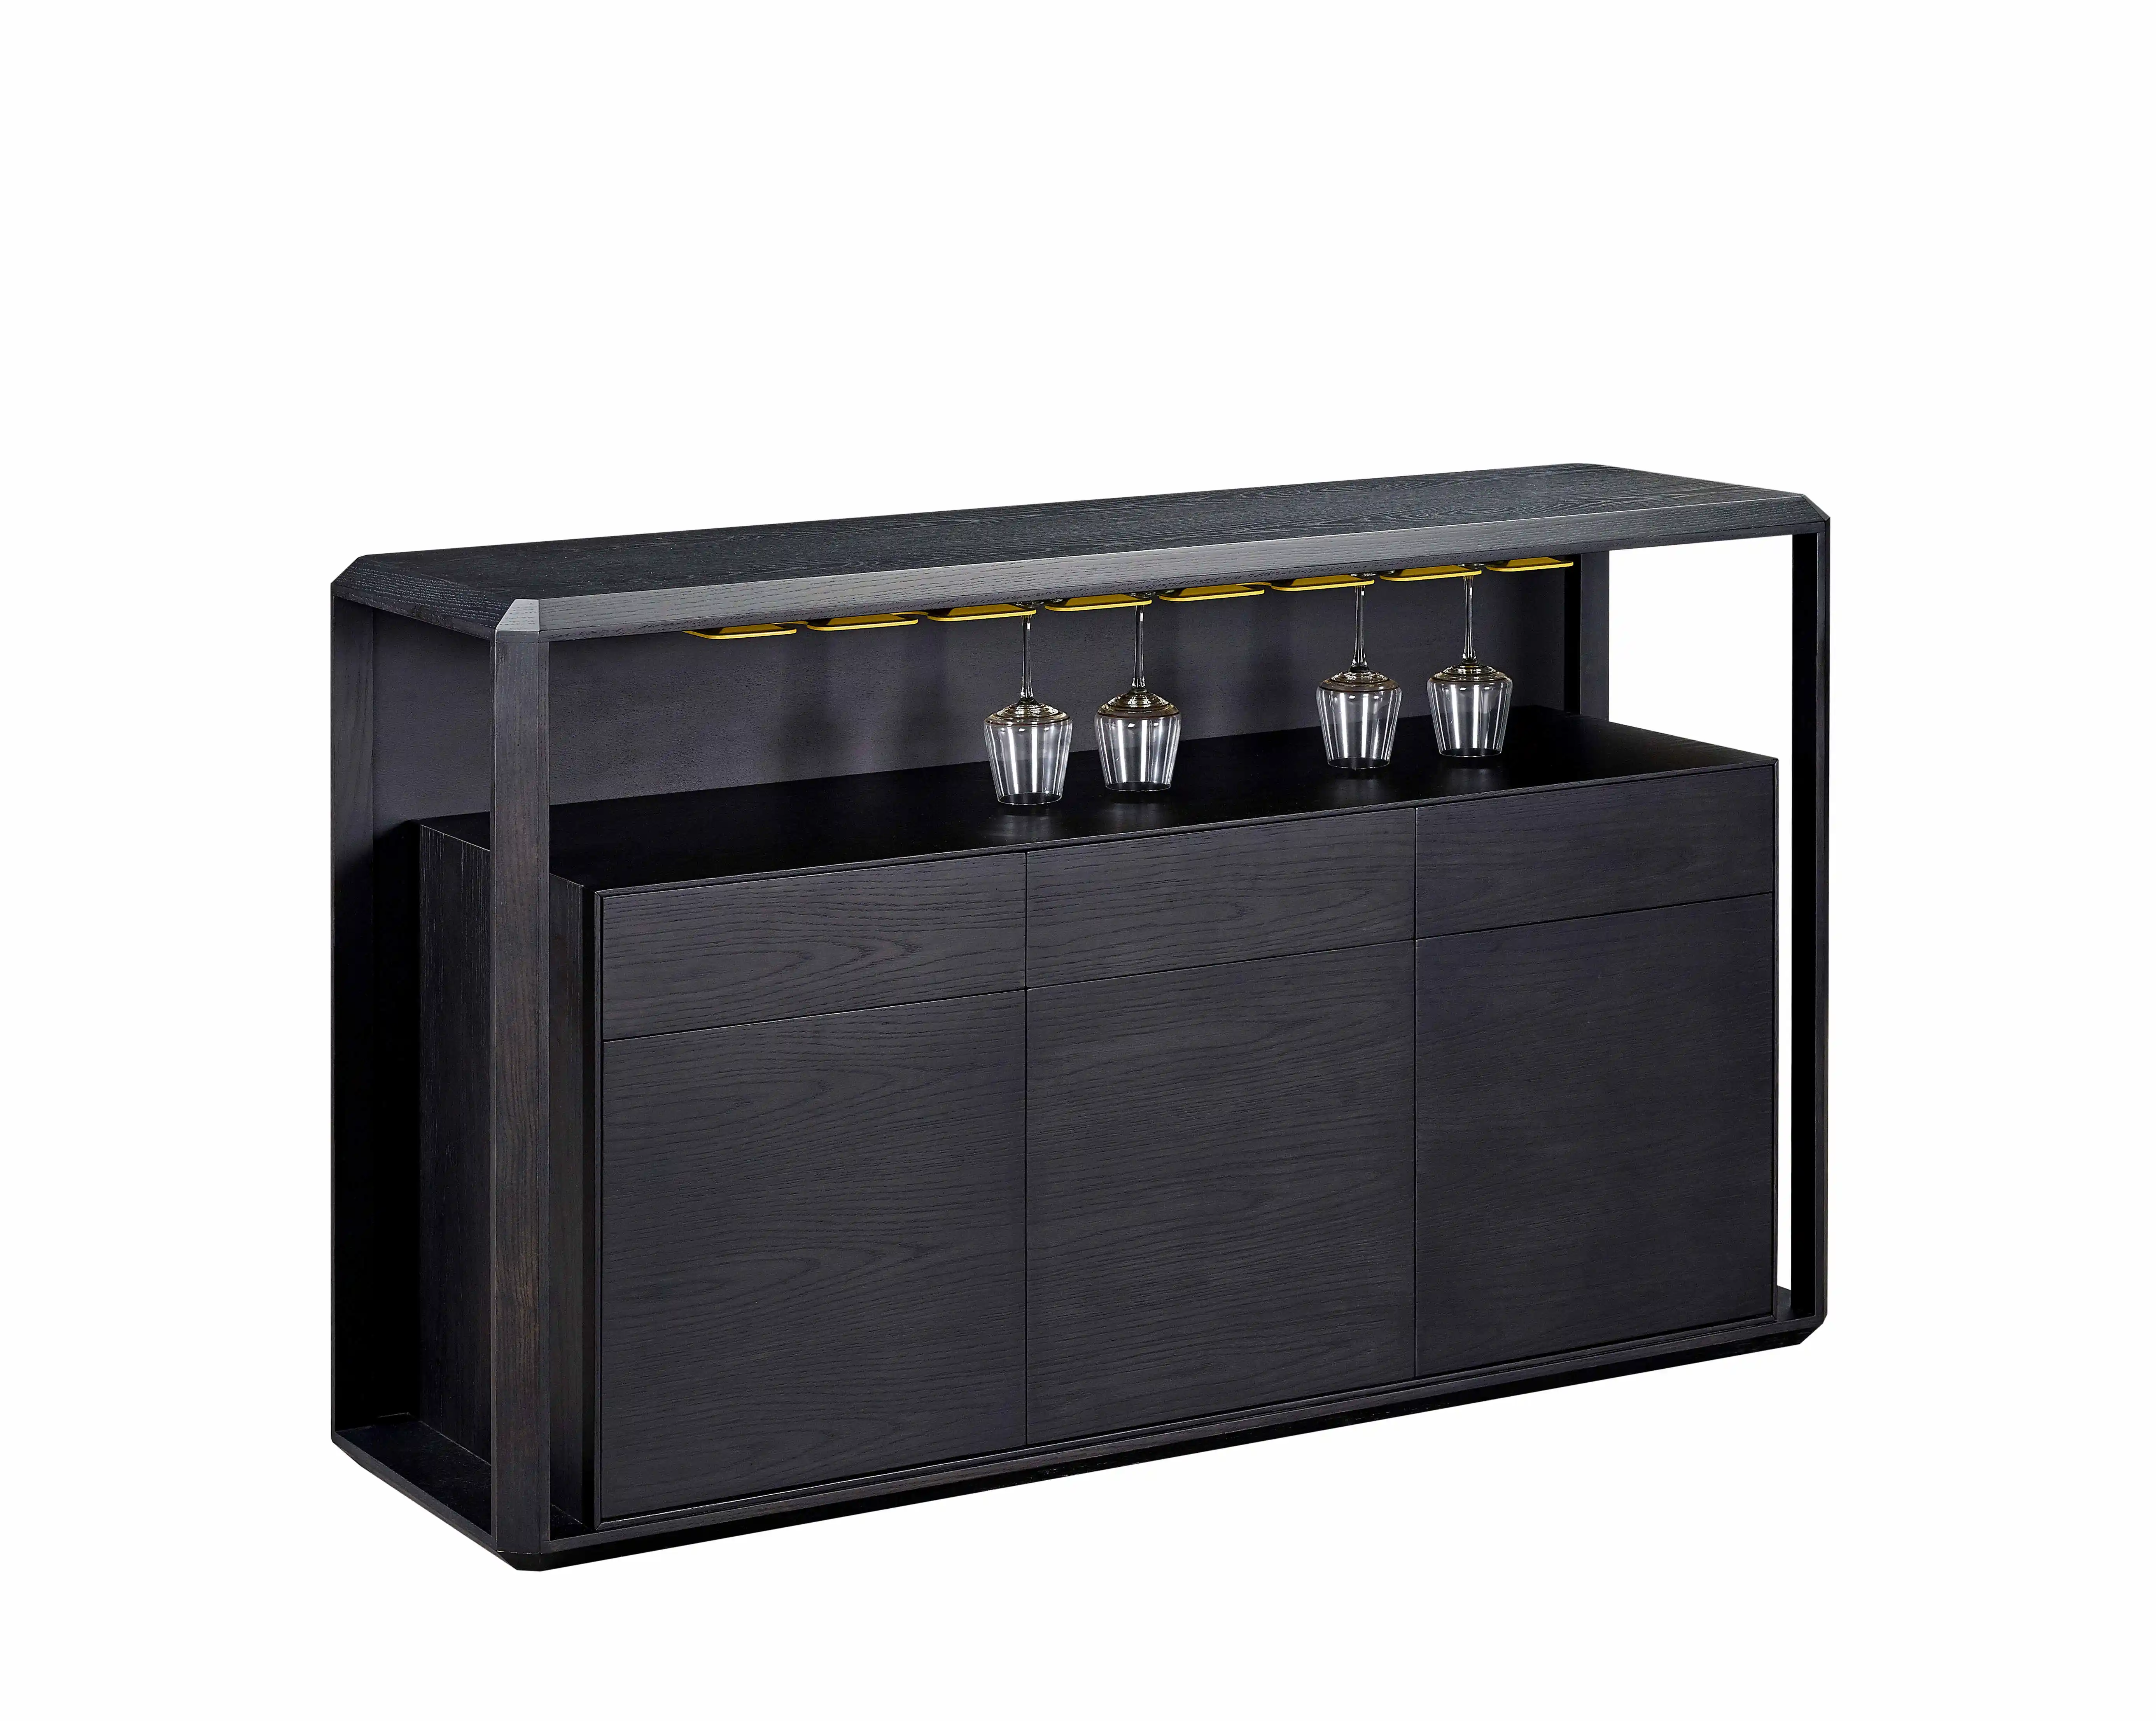 Home furniture display buffet cabinet for Dining room catering equipment wooden storage sideboard